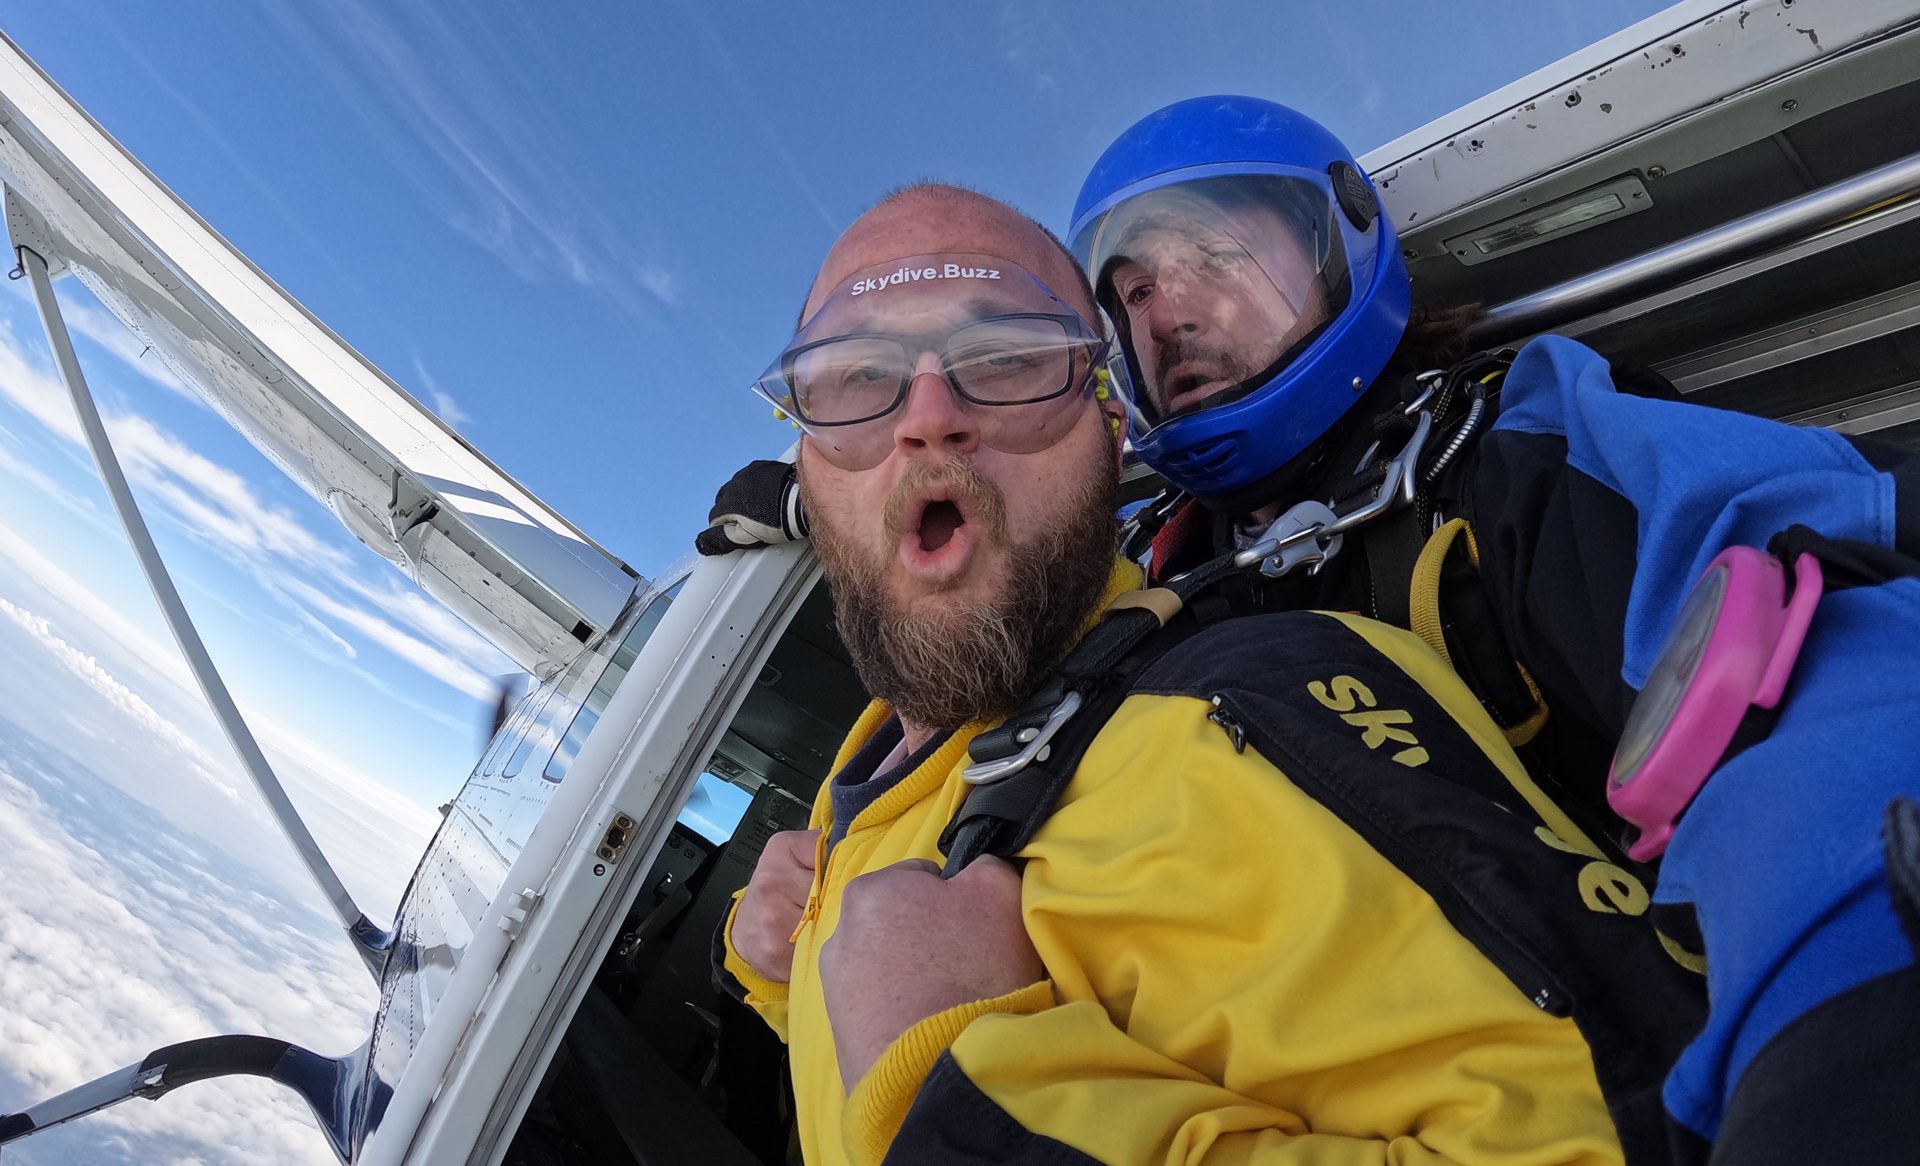 Hospiscare Heroes – From skydives to fundraising groups